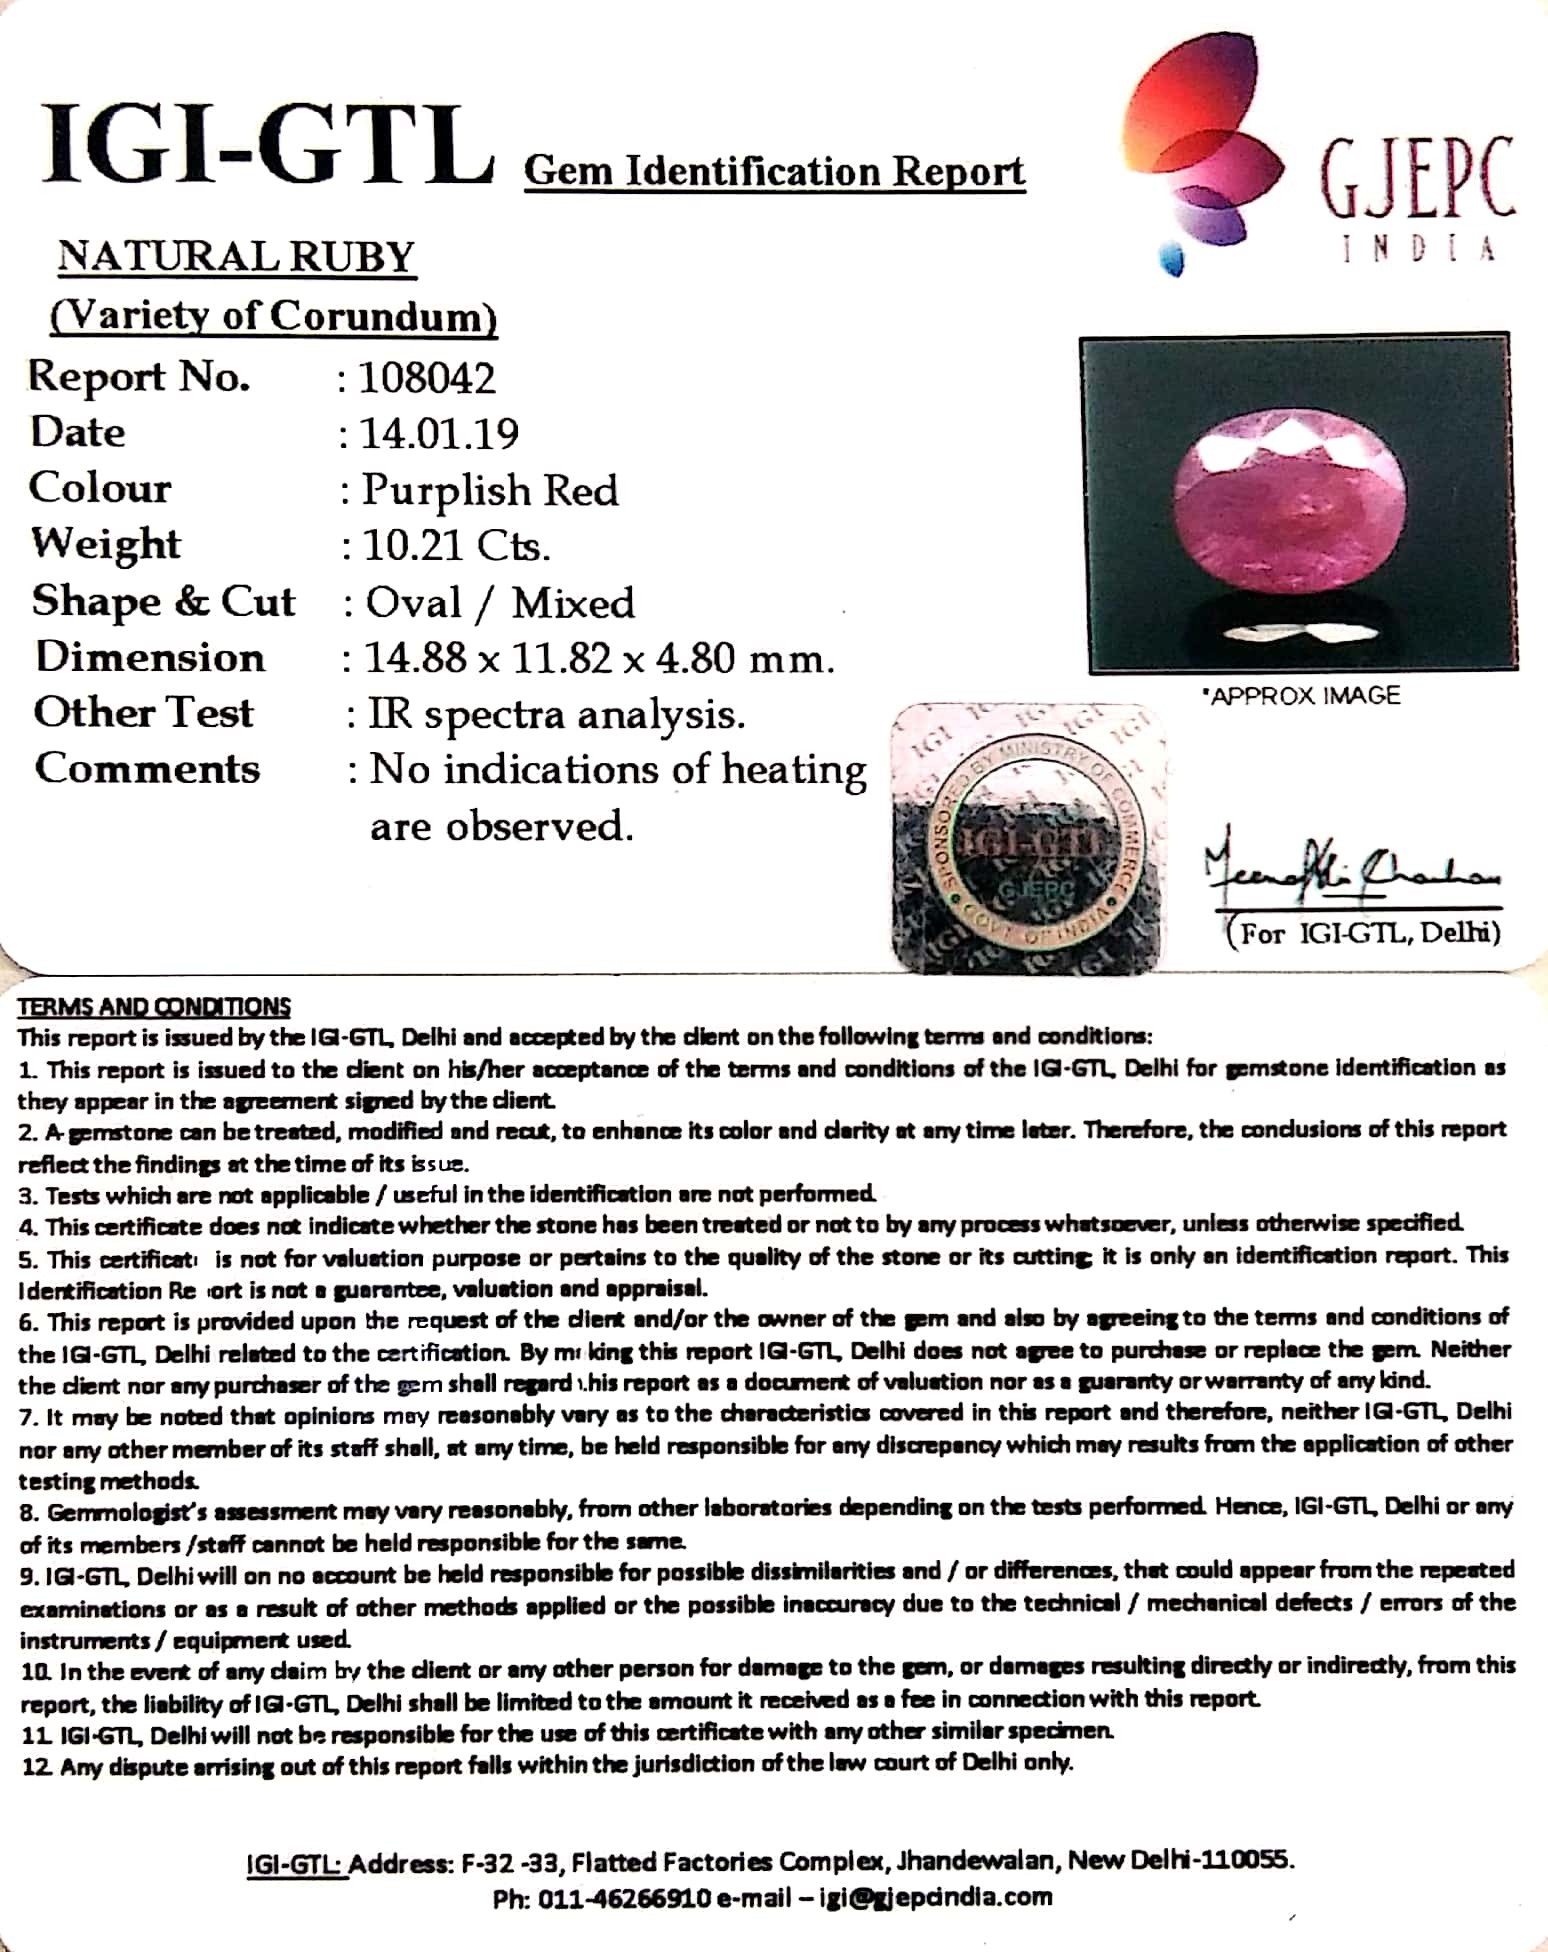 11.34 Ratti Natural New Burma Ruby with Govt Lab Certificate-(2331)